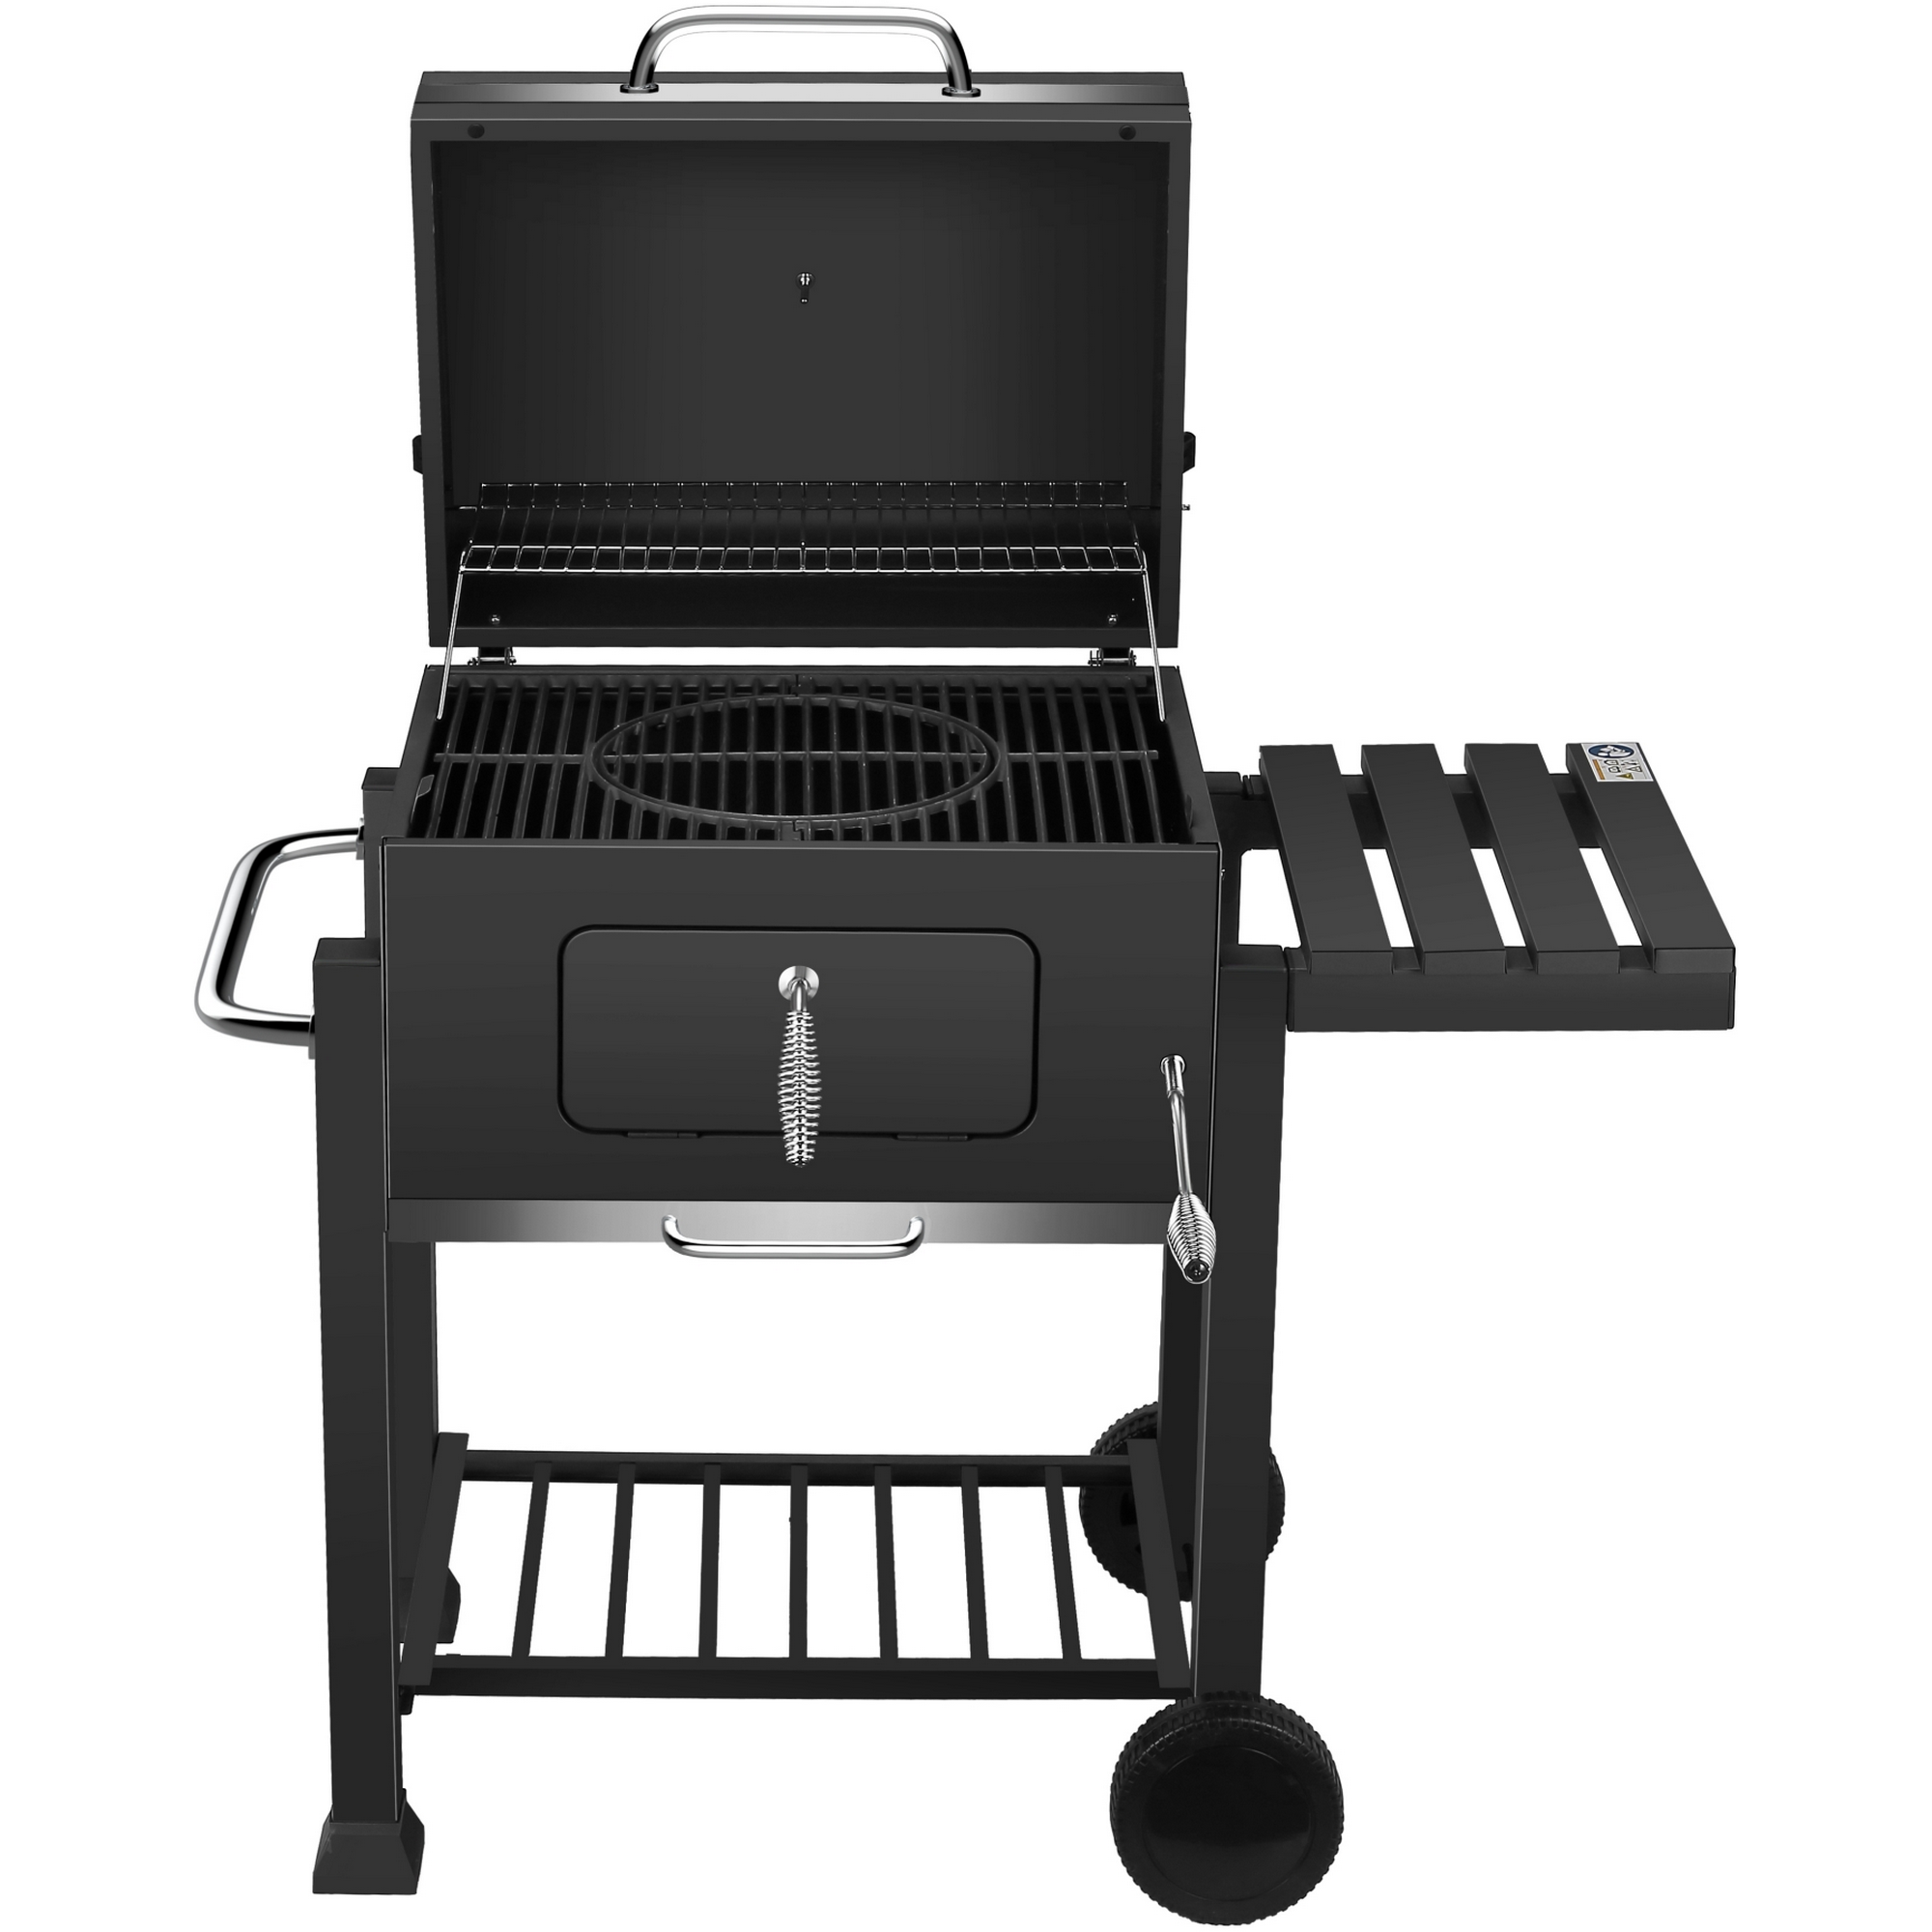 Holzkohlegrill 'Ontario Deluxe' schwarz 114 x 108 x 65 cm + product picture